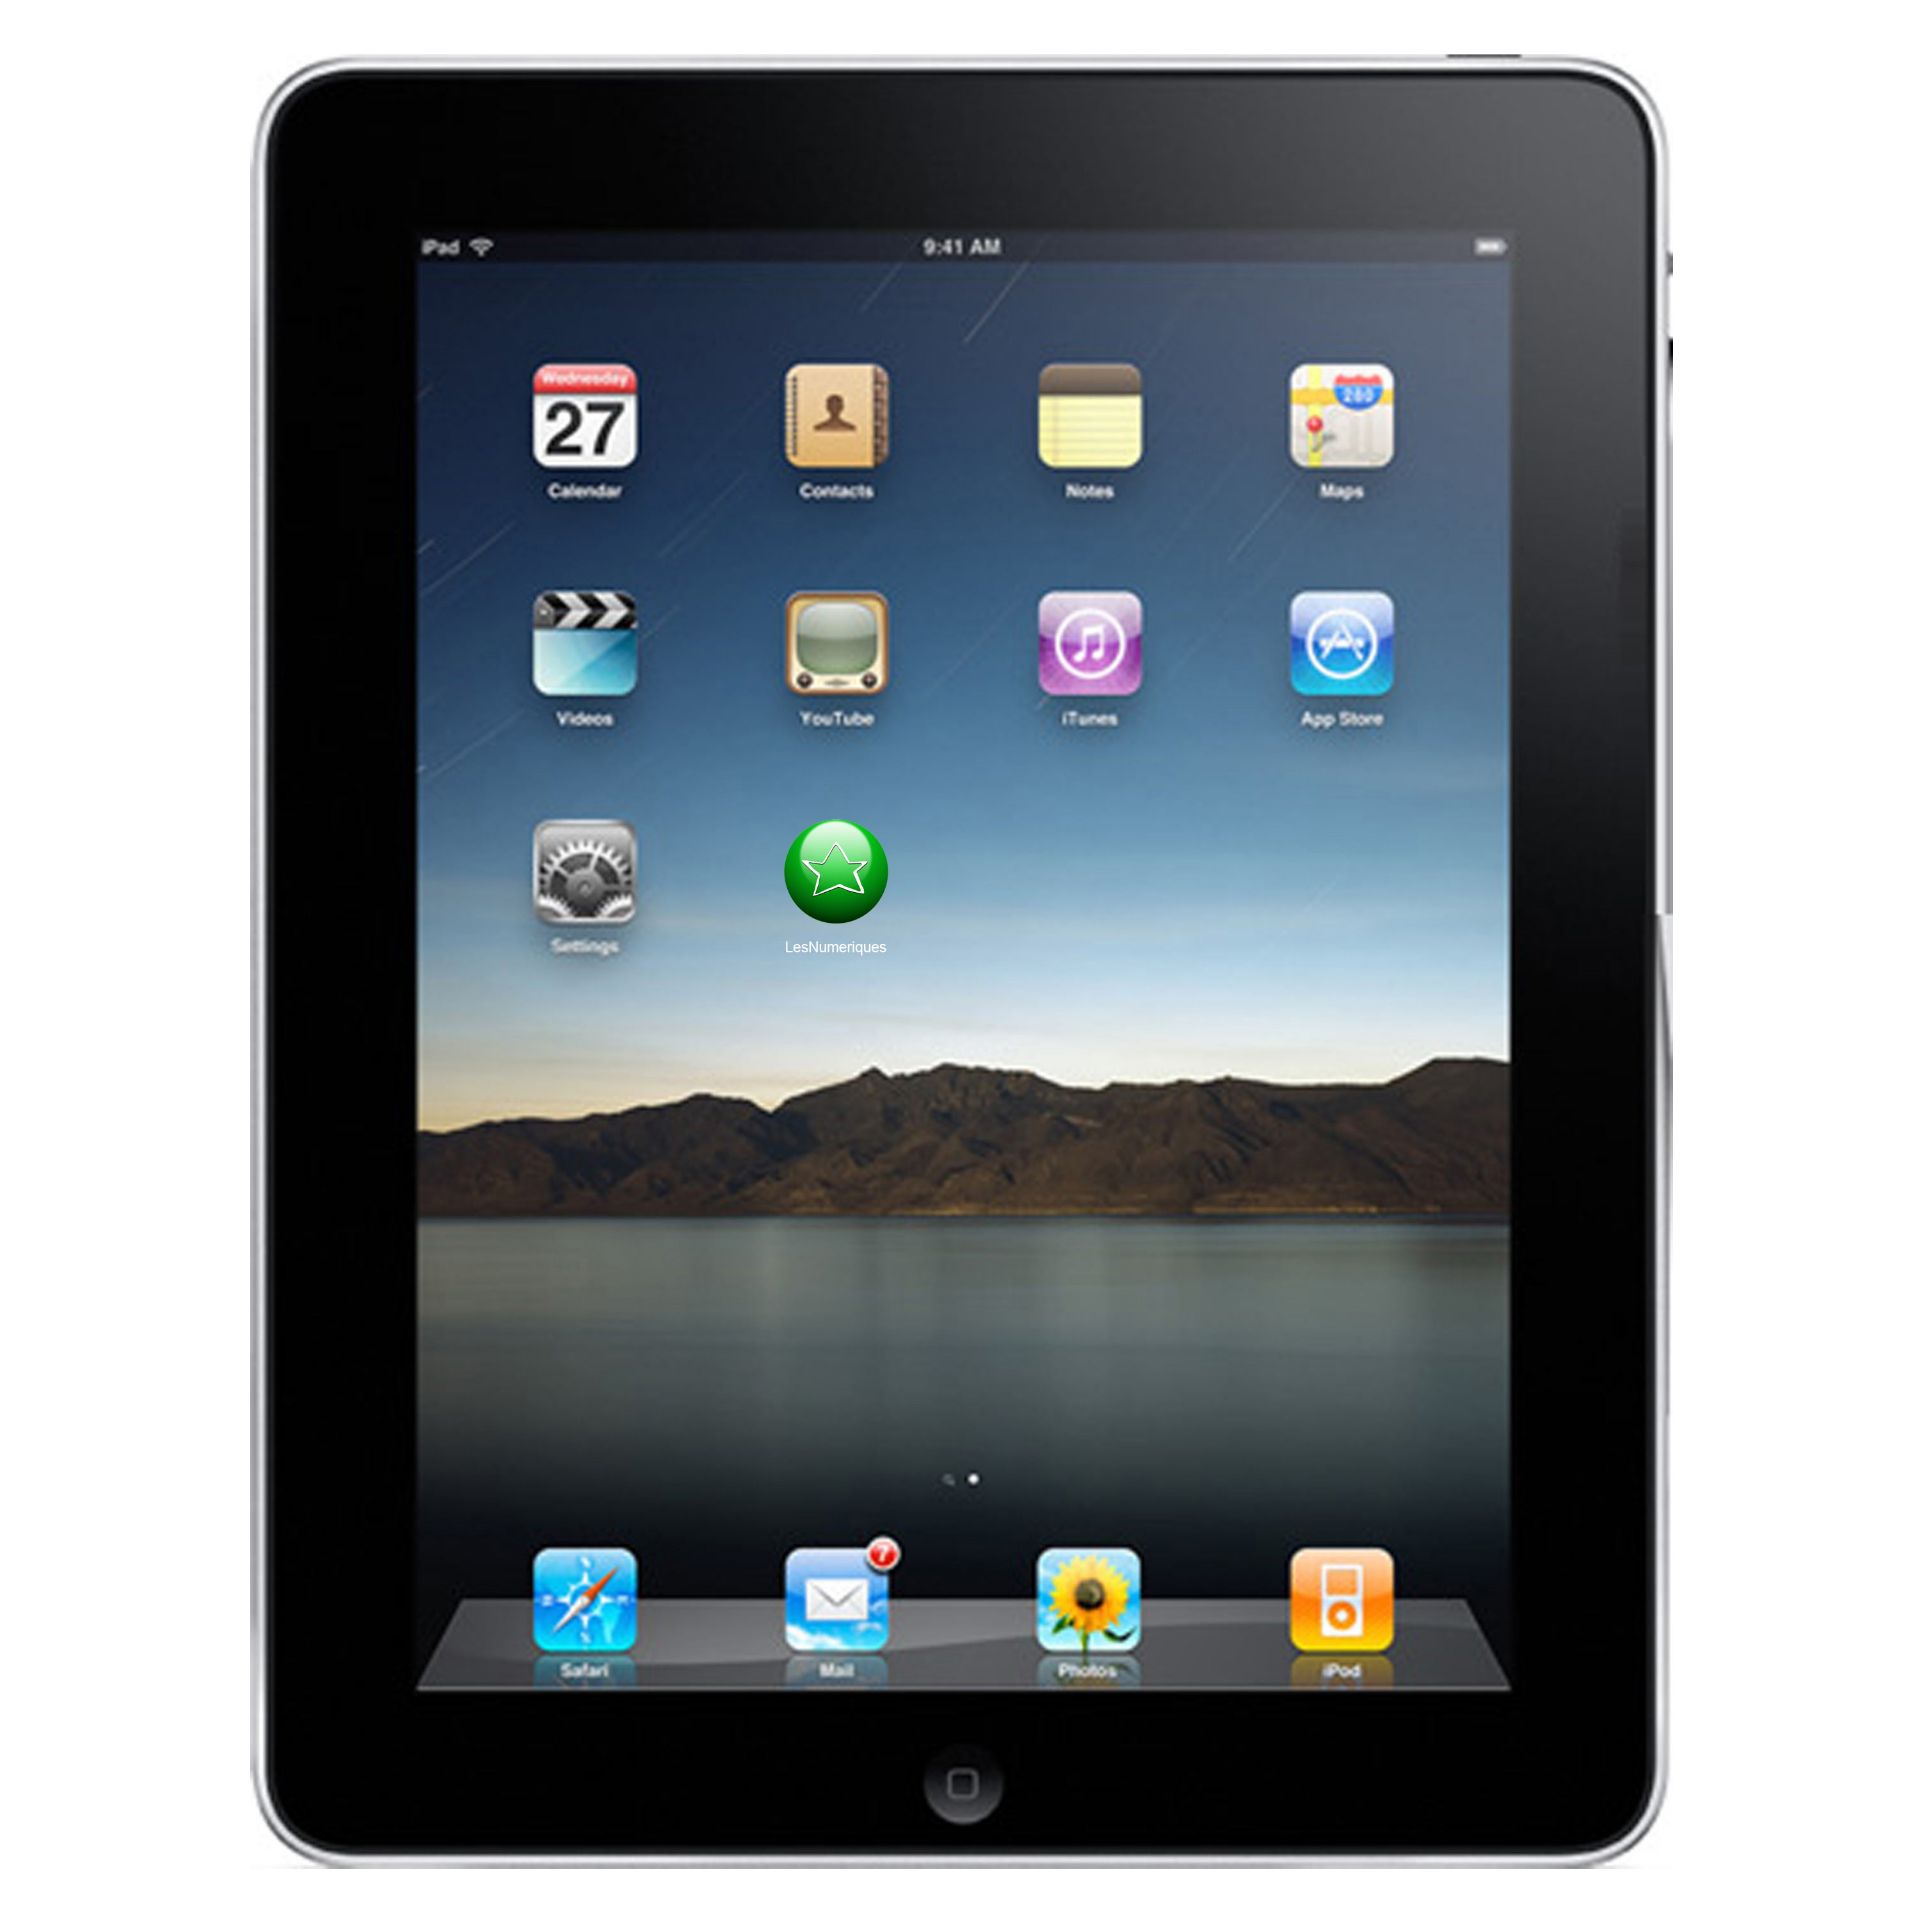 V iPad 4 16Gb Black With Two Cameras/Retina Display With Charger In Original Box - Factory Graded